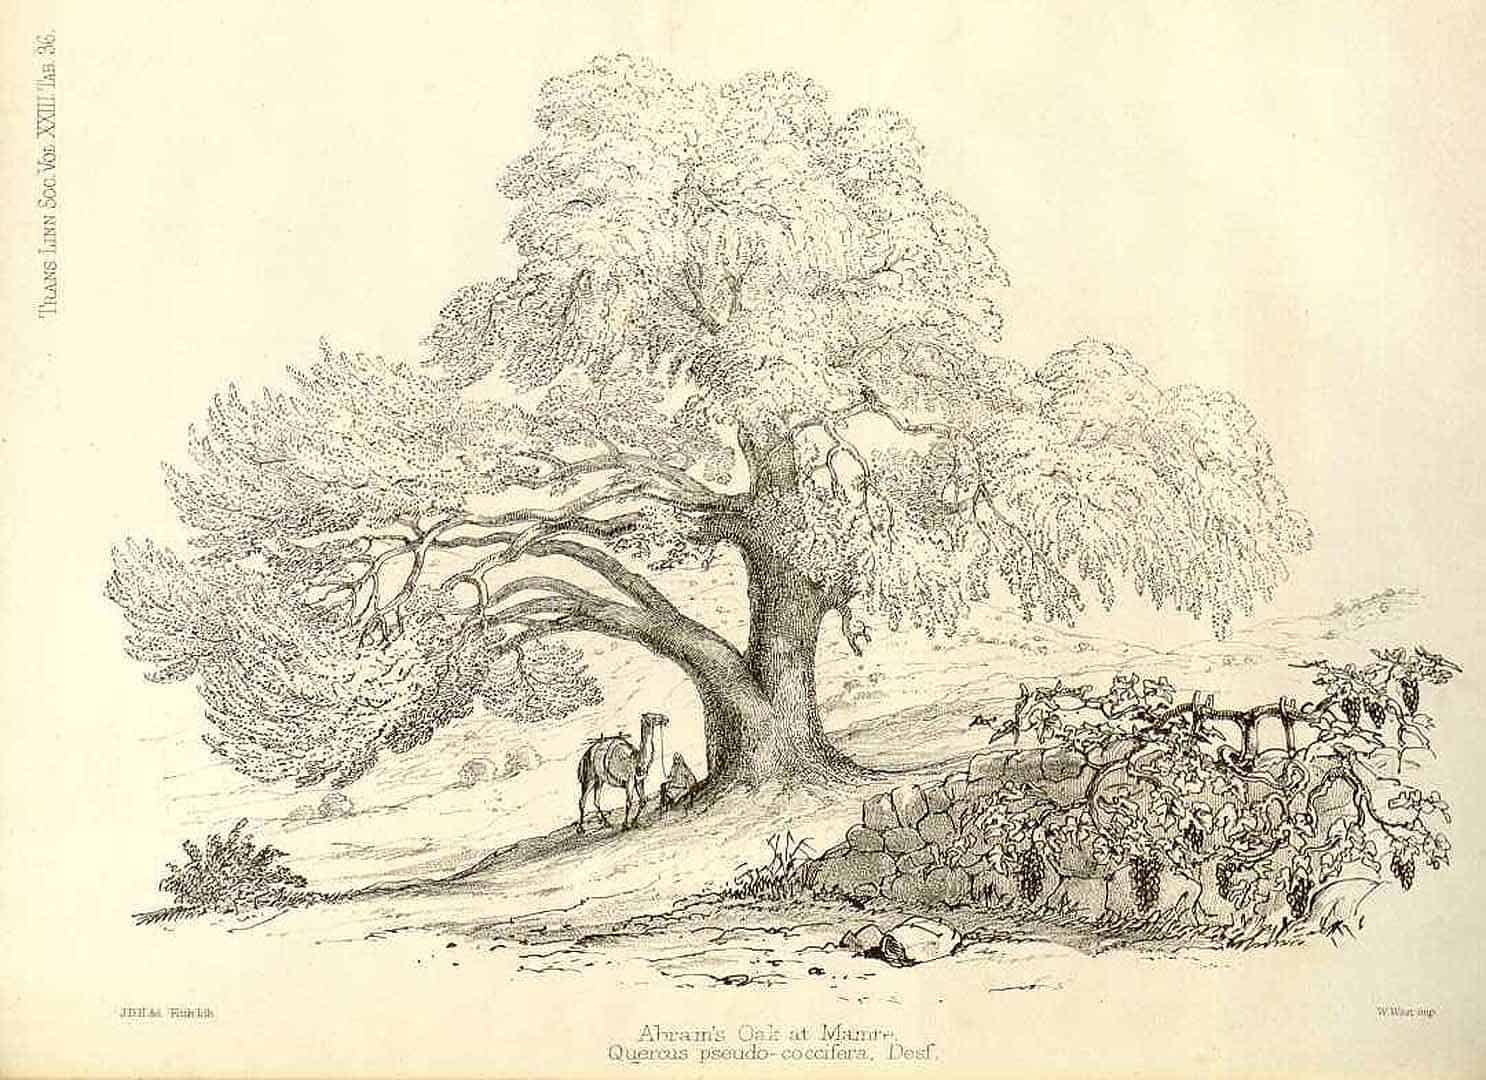 Sketch by J.D. Hooker, Transactions of the Linnean Society of London (1791-1875), vol. 23 (1862) t. 36, Quercus coccifera L., contributed to www.plantillustrations.org by Missouri Botanical Garden, St. Louis, U.S.A.